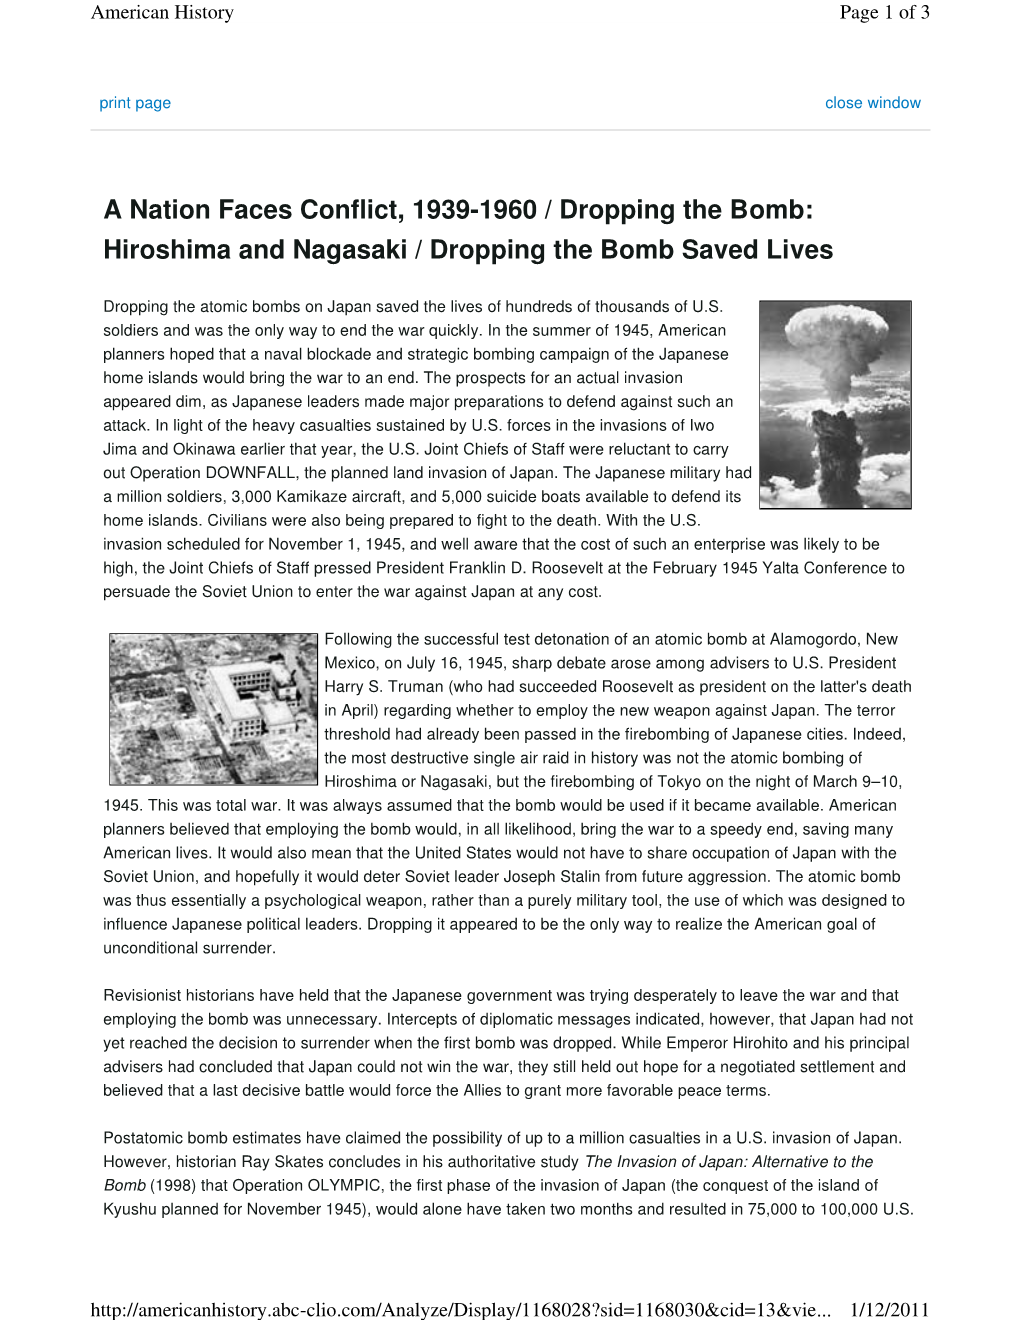 A Nation Faces Conflict, 1939-1960 / Dropping the Bomb: Hiroshima and Nagasaki / Dropping the Bomb Saved Lives